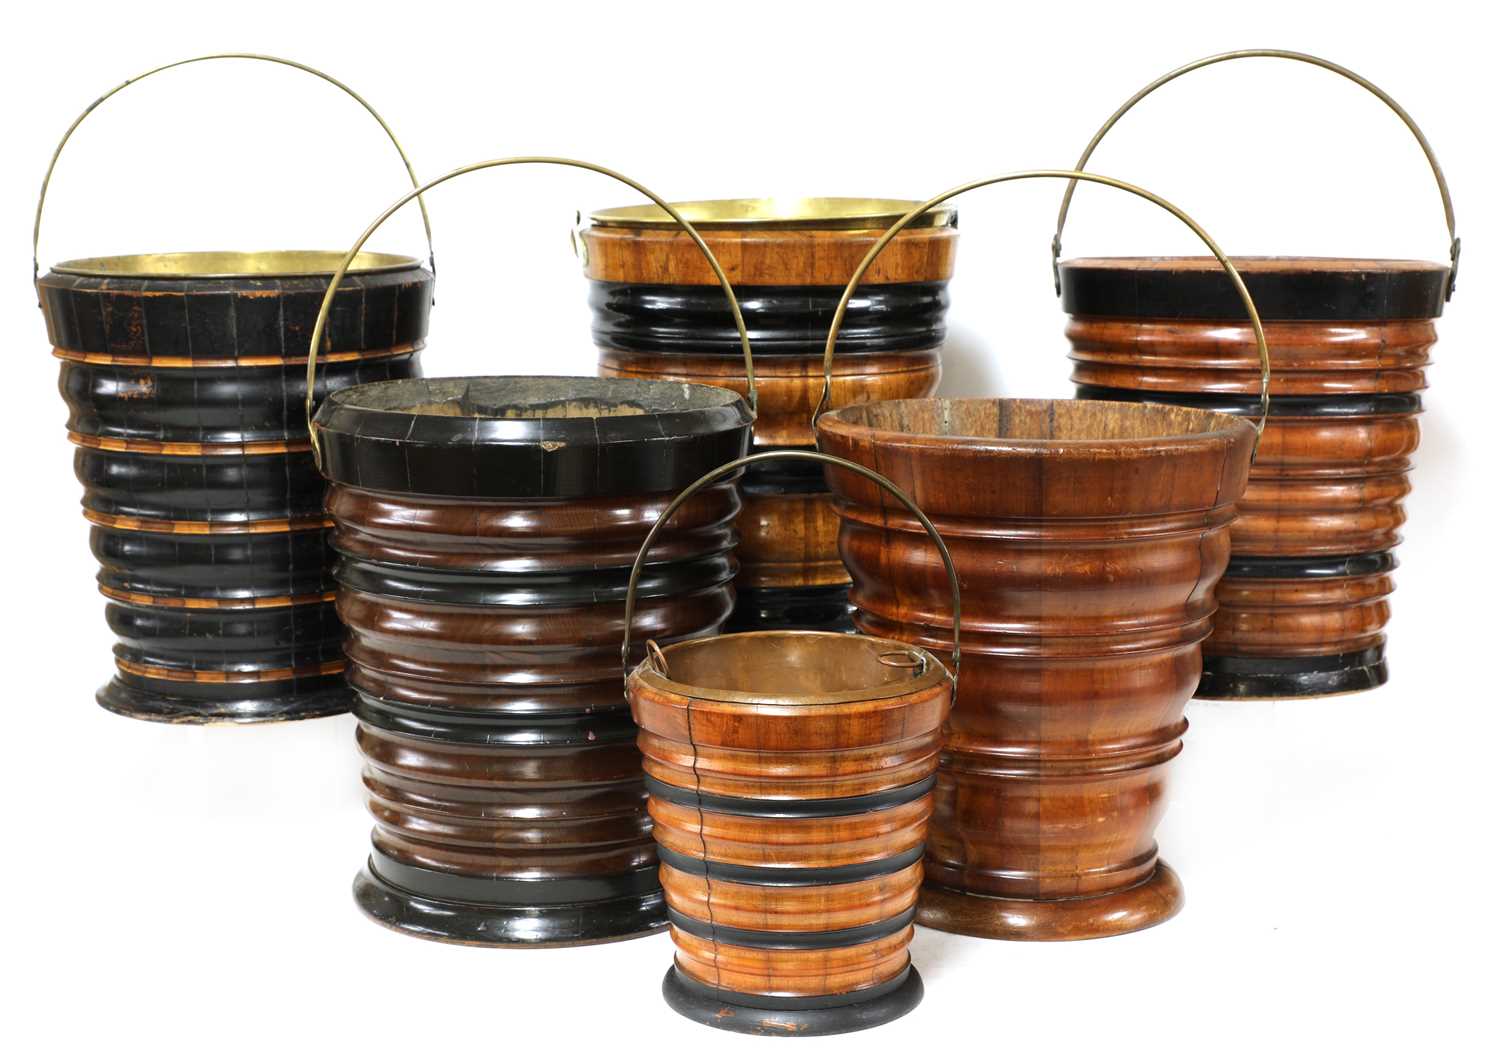 A collection of five Dutch turned wooden peat buckets,